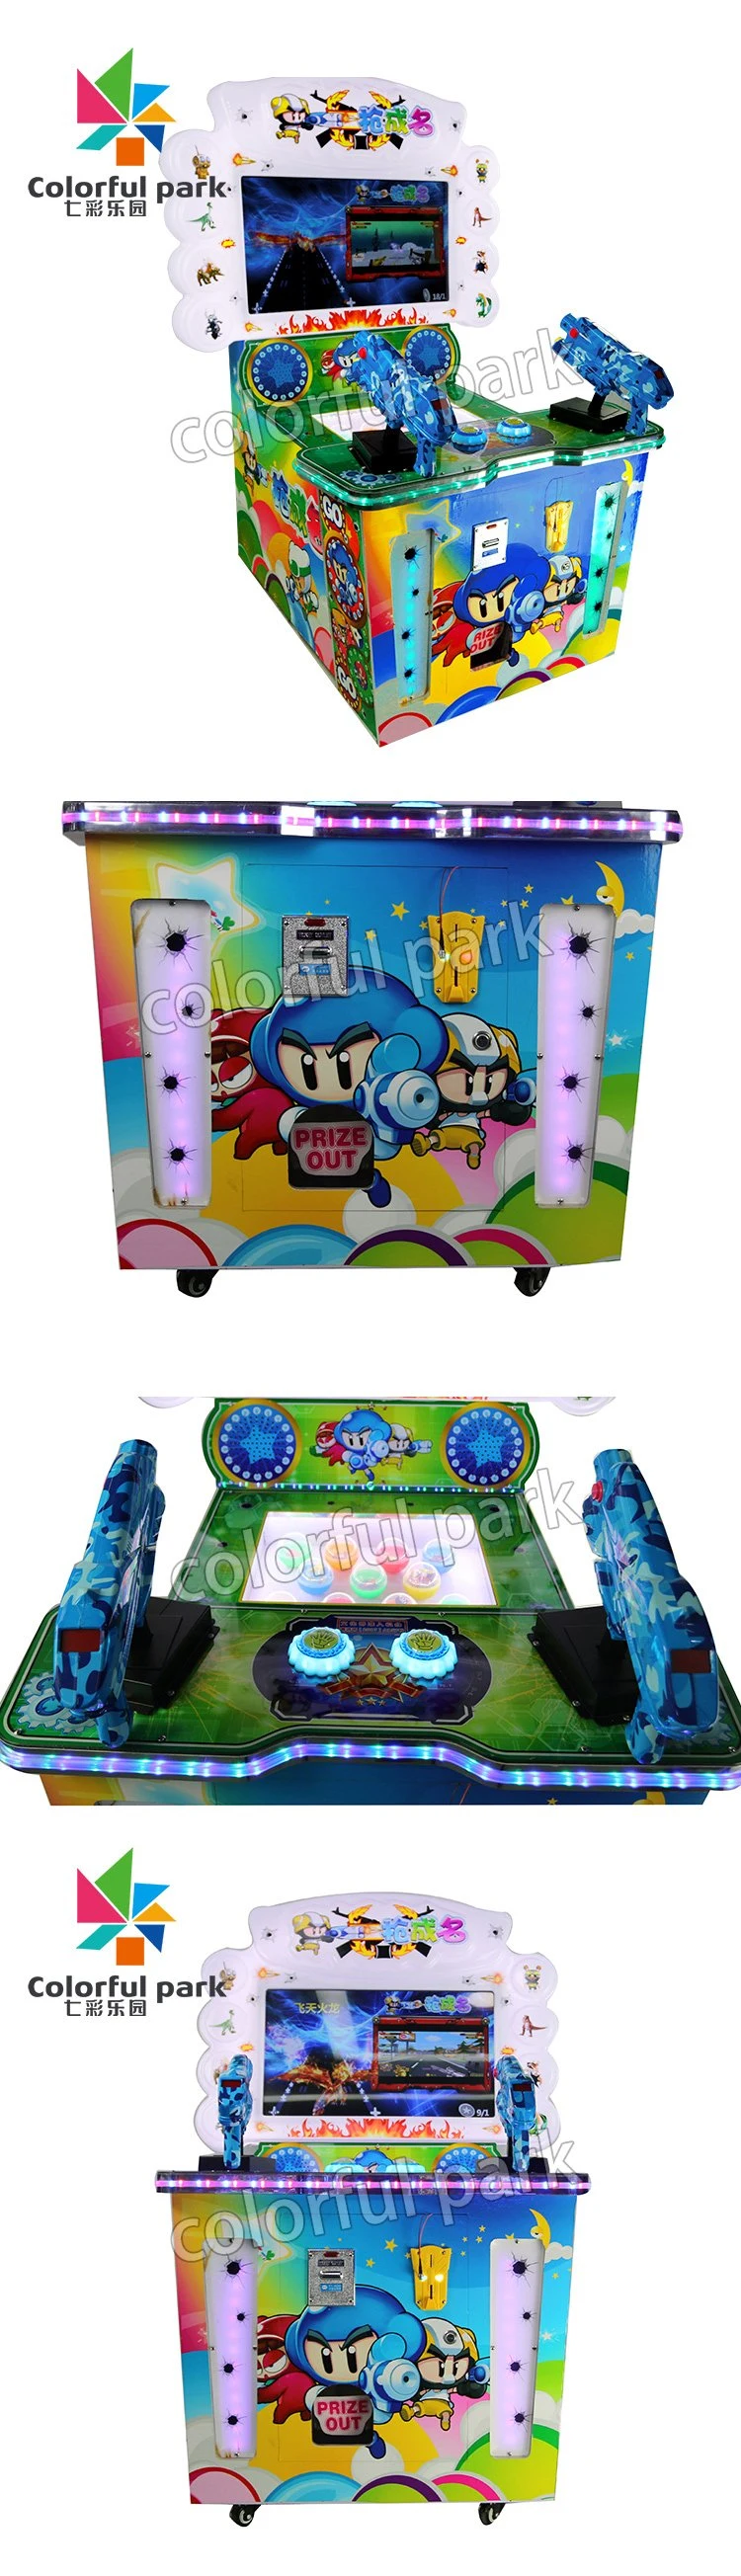 Colorful Park 3D Shooter Video Gun Shooting Arcade Redemption Game Shooting Game Machine